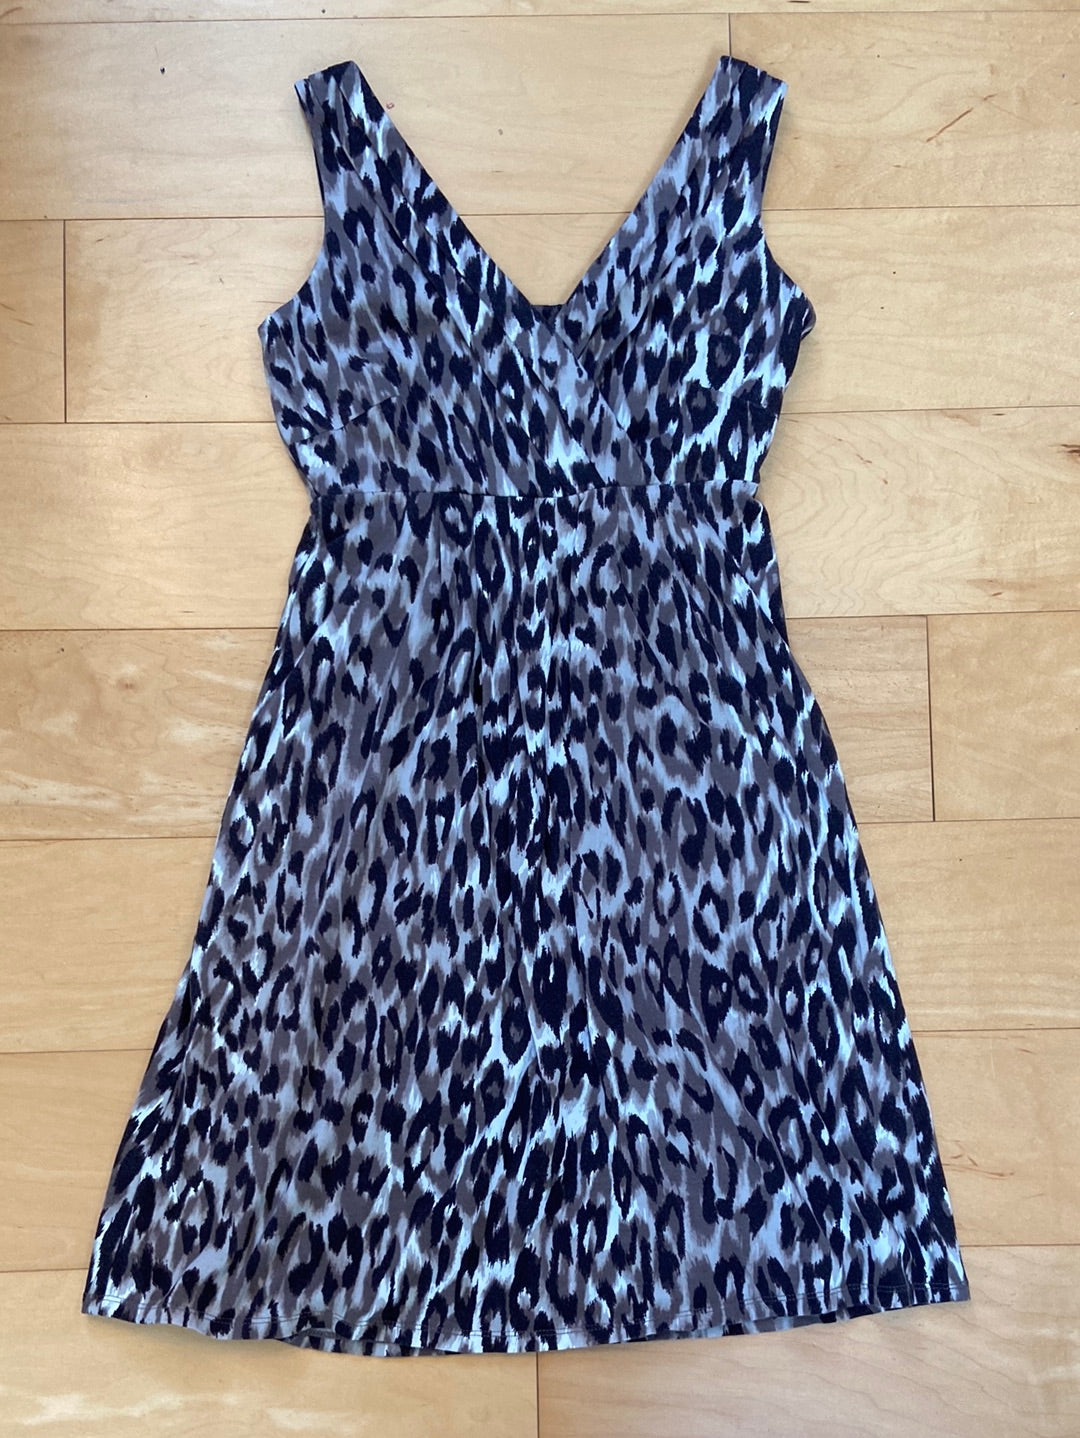 Sleeveless animal print cheetah dress in shades of brown and black kneelength crossover bodice